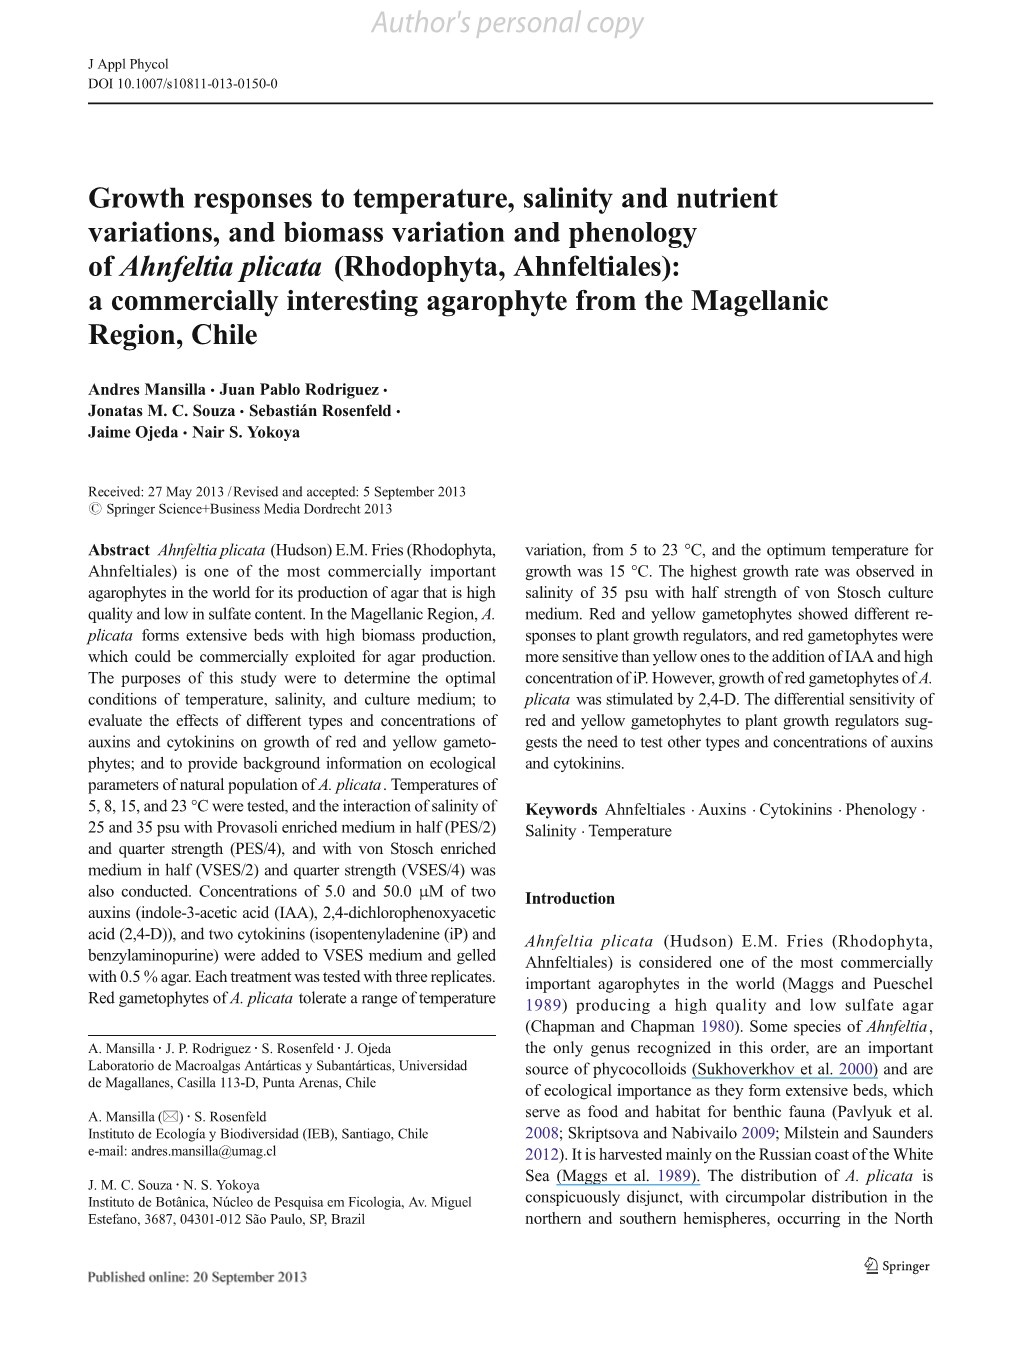 Growth Responses to Temperature, Salinity and Nutrient Variations, And